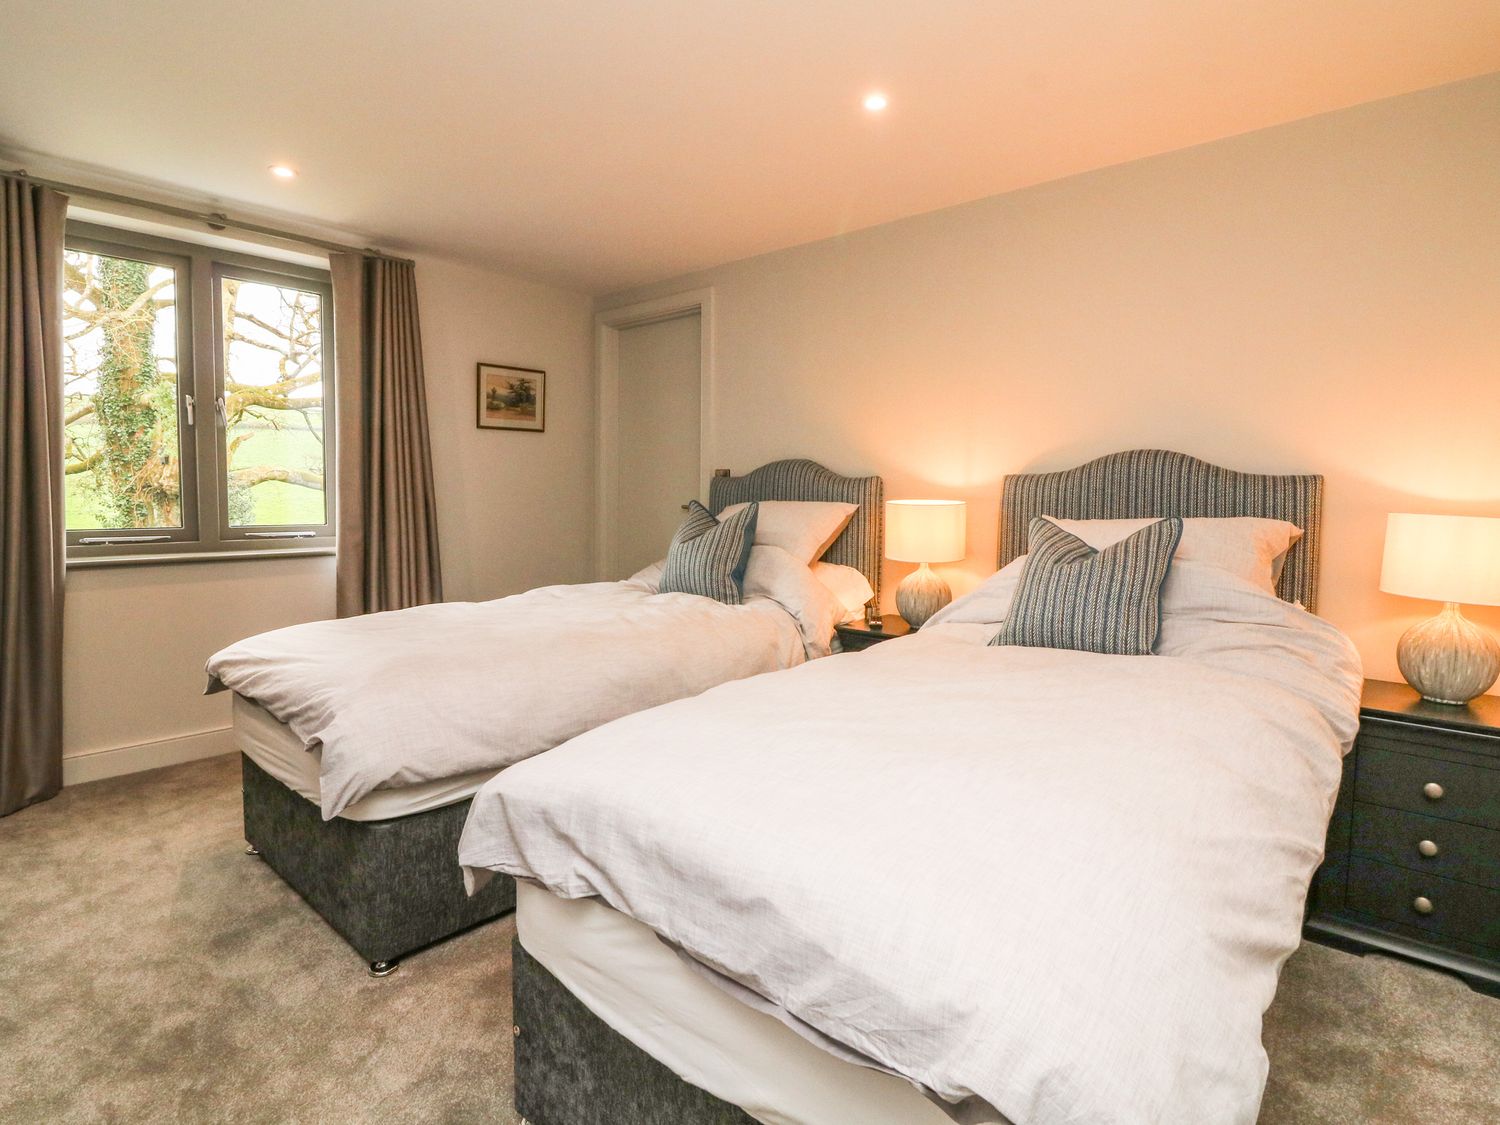 Court Lodge, Wiveliscombe, Somerset, ground-floor living, dog-friendly, family-friendly and hot tub.